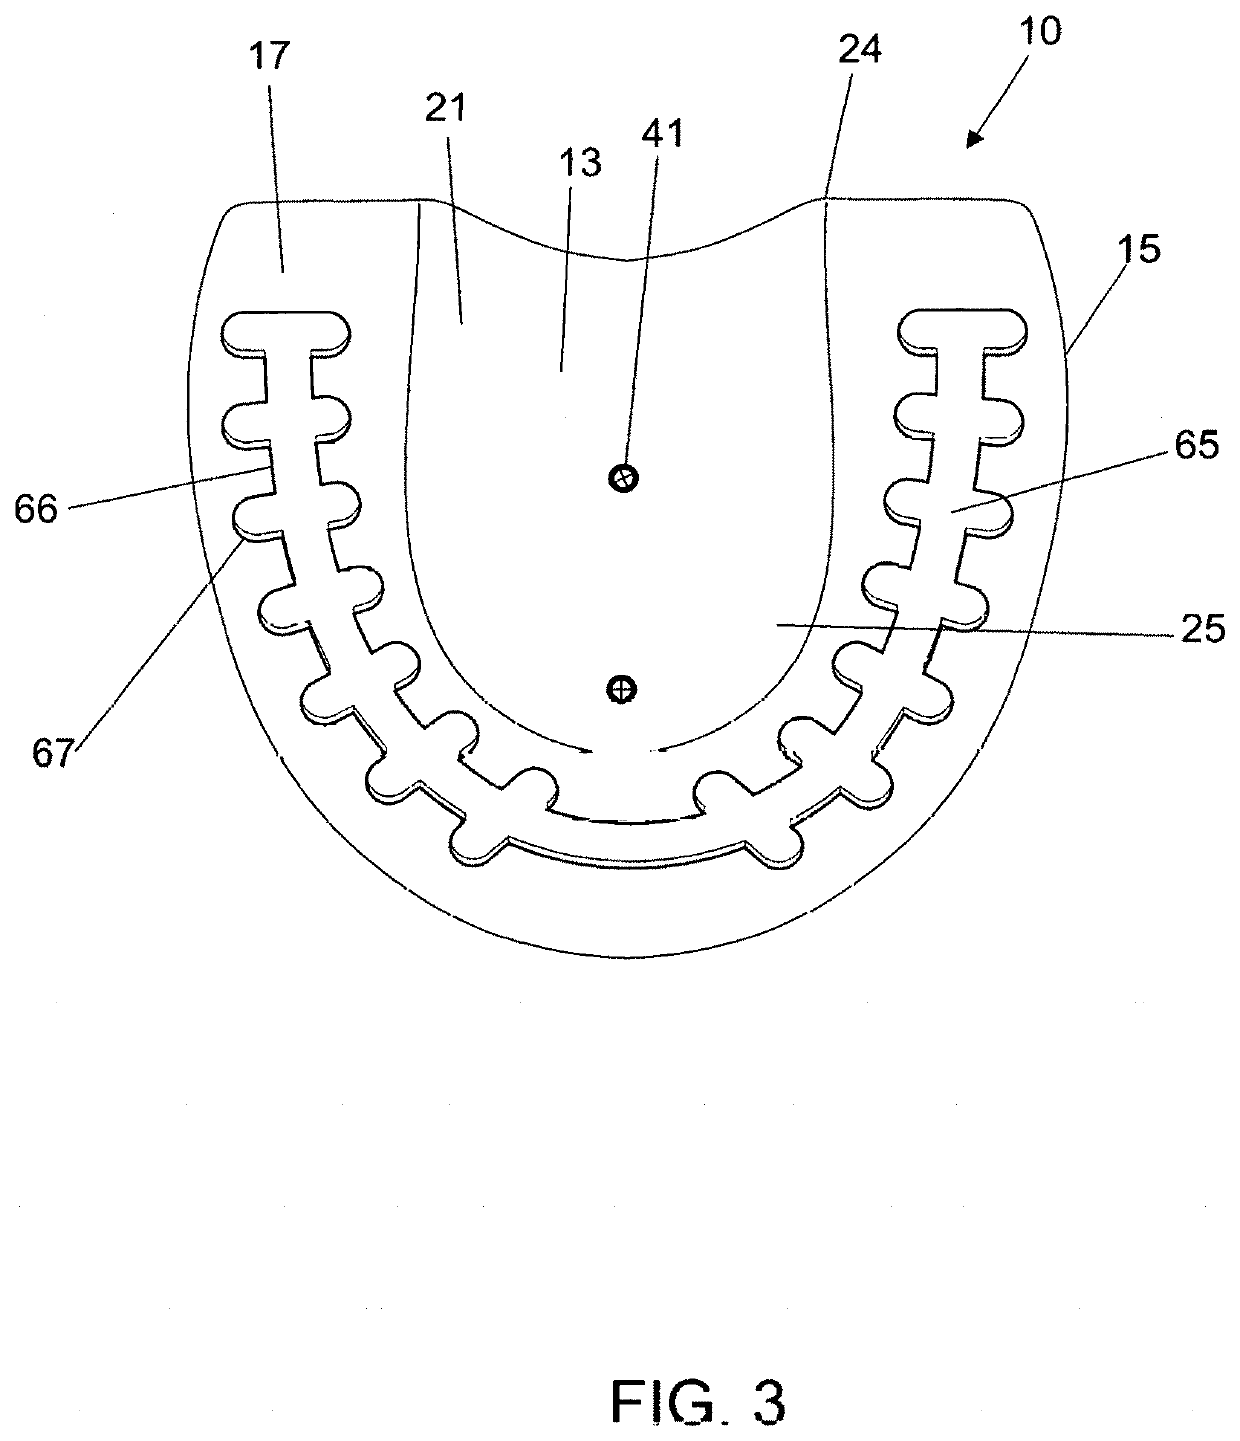 Surgical drill guide aimed at locating ideal position for dental implants in edentulous patients